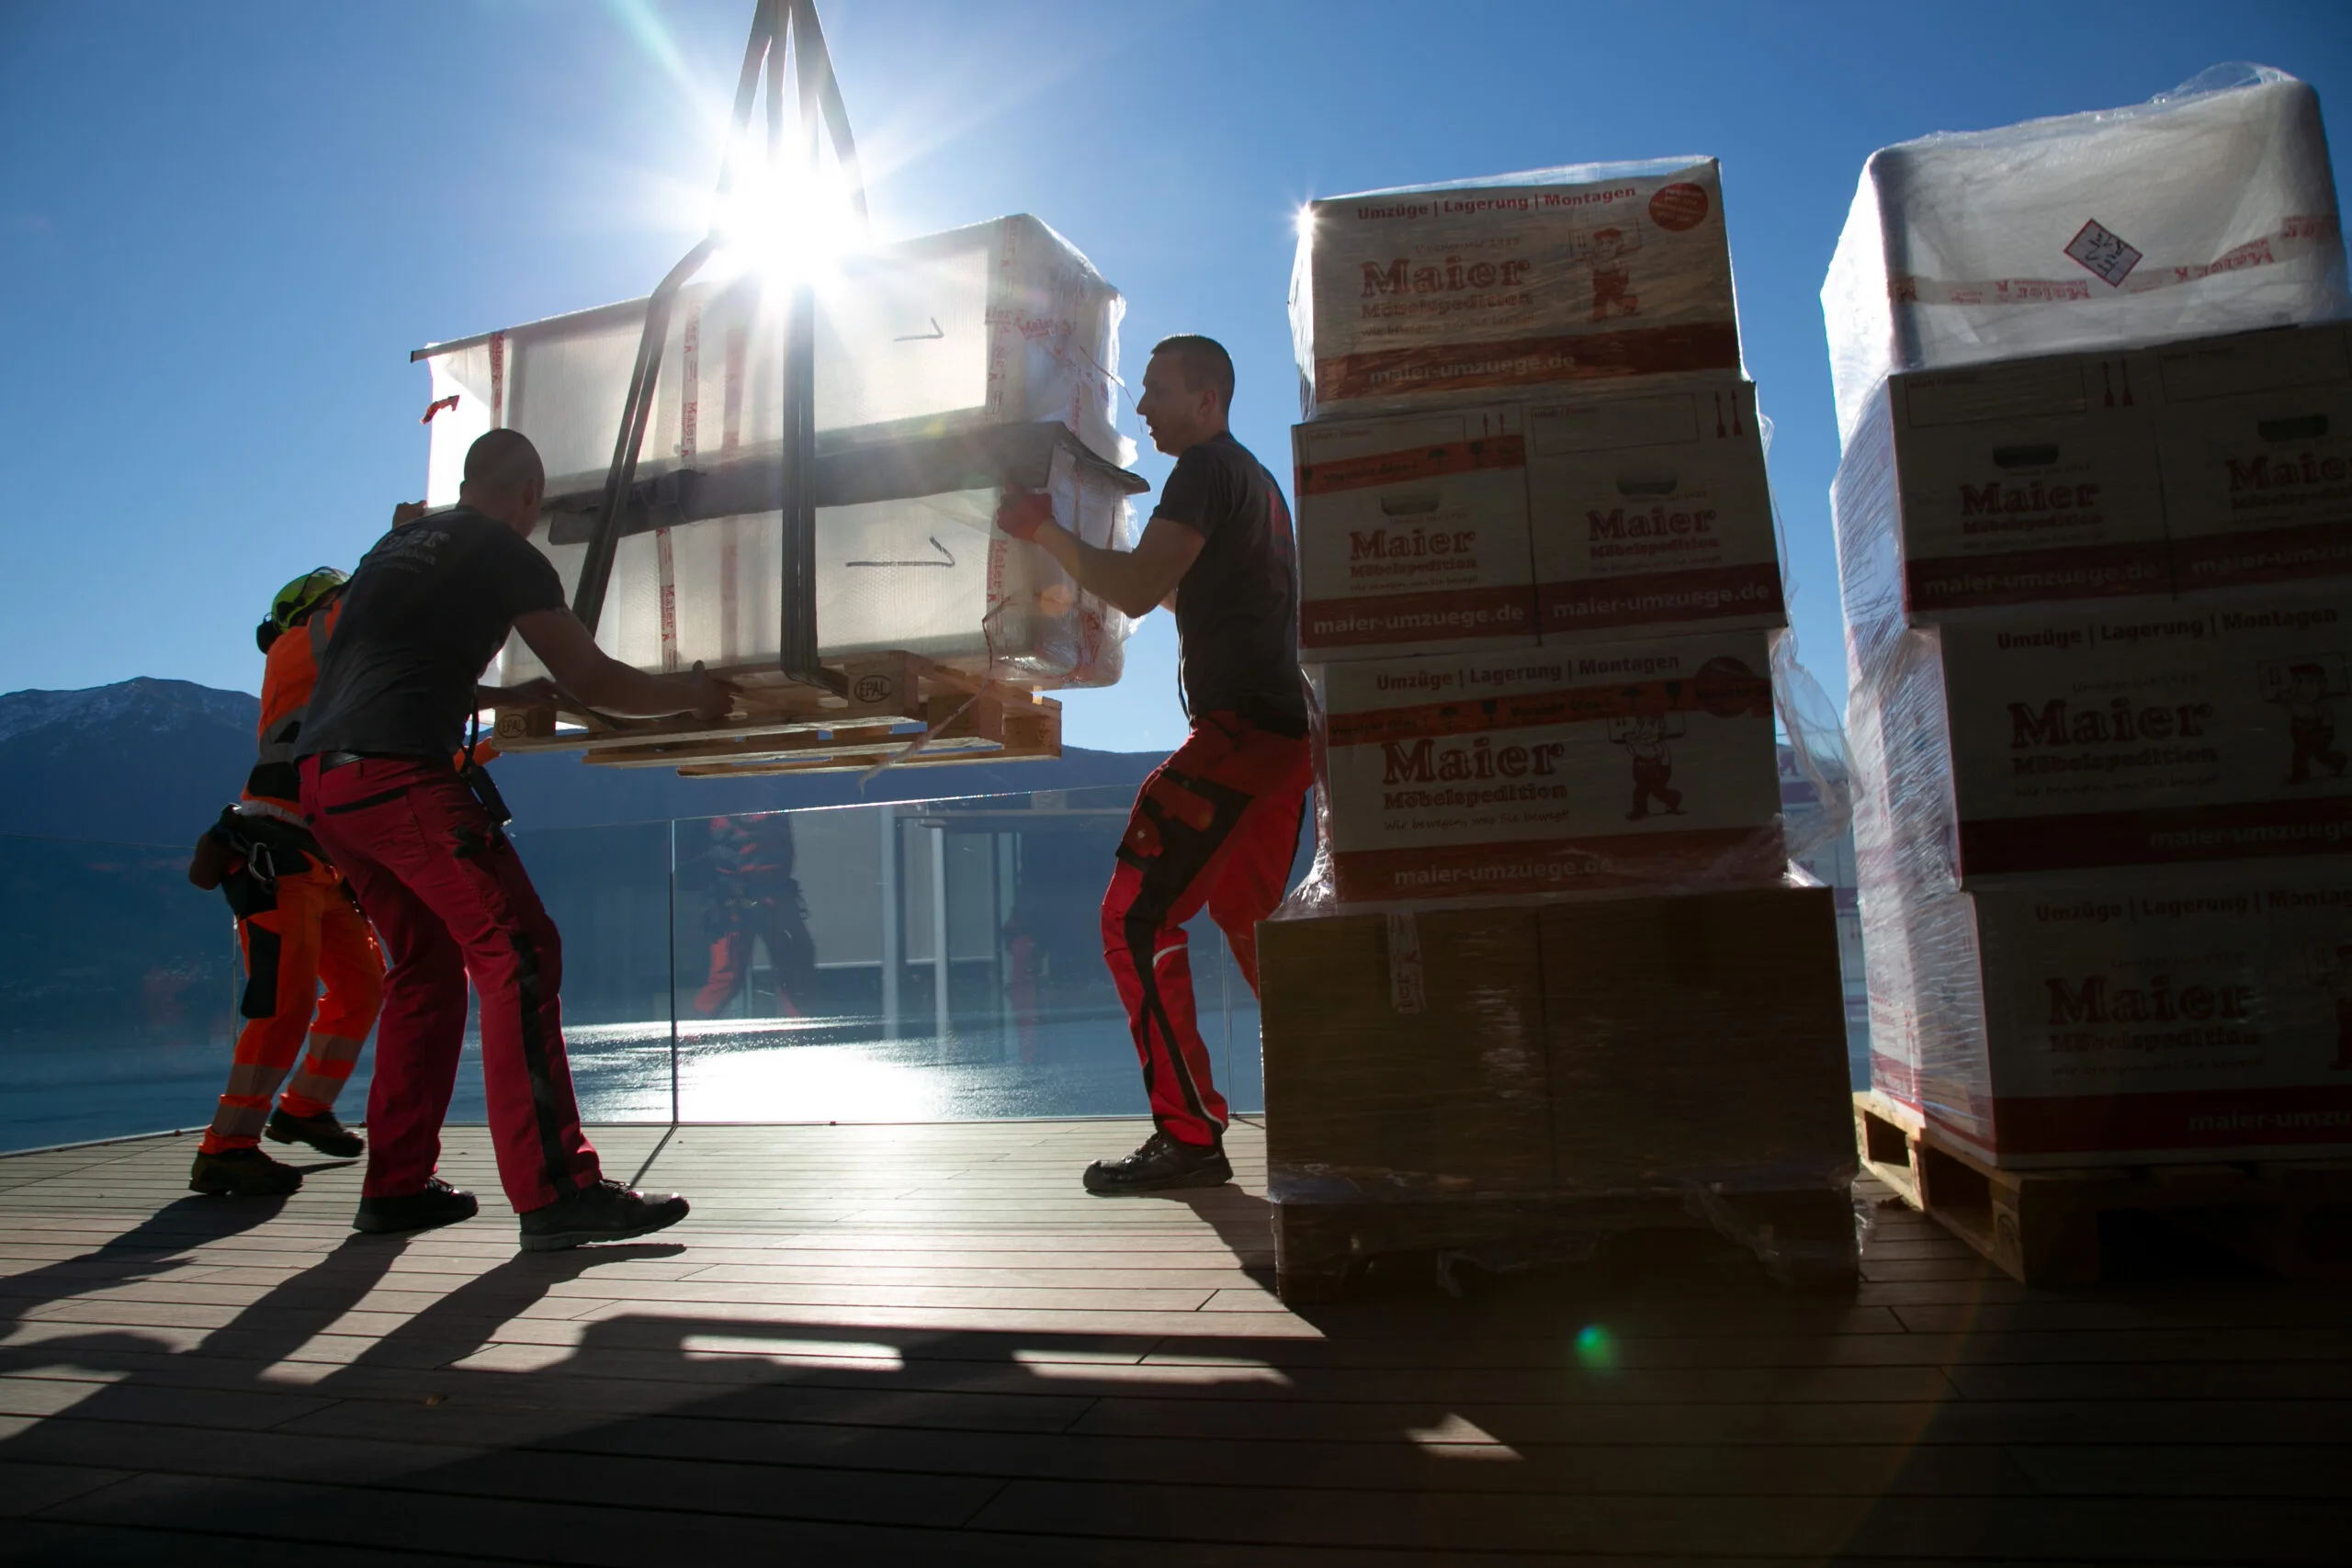 Removal workers unload pallets of goods against a breathtaking mountain backdrop and bathe in the warm glow of the sun.